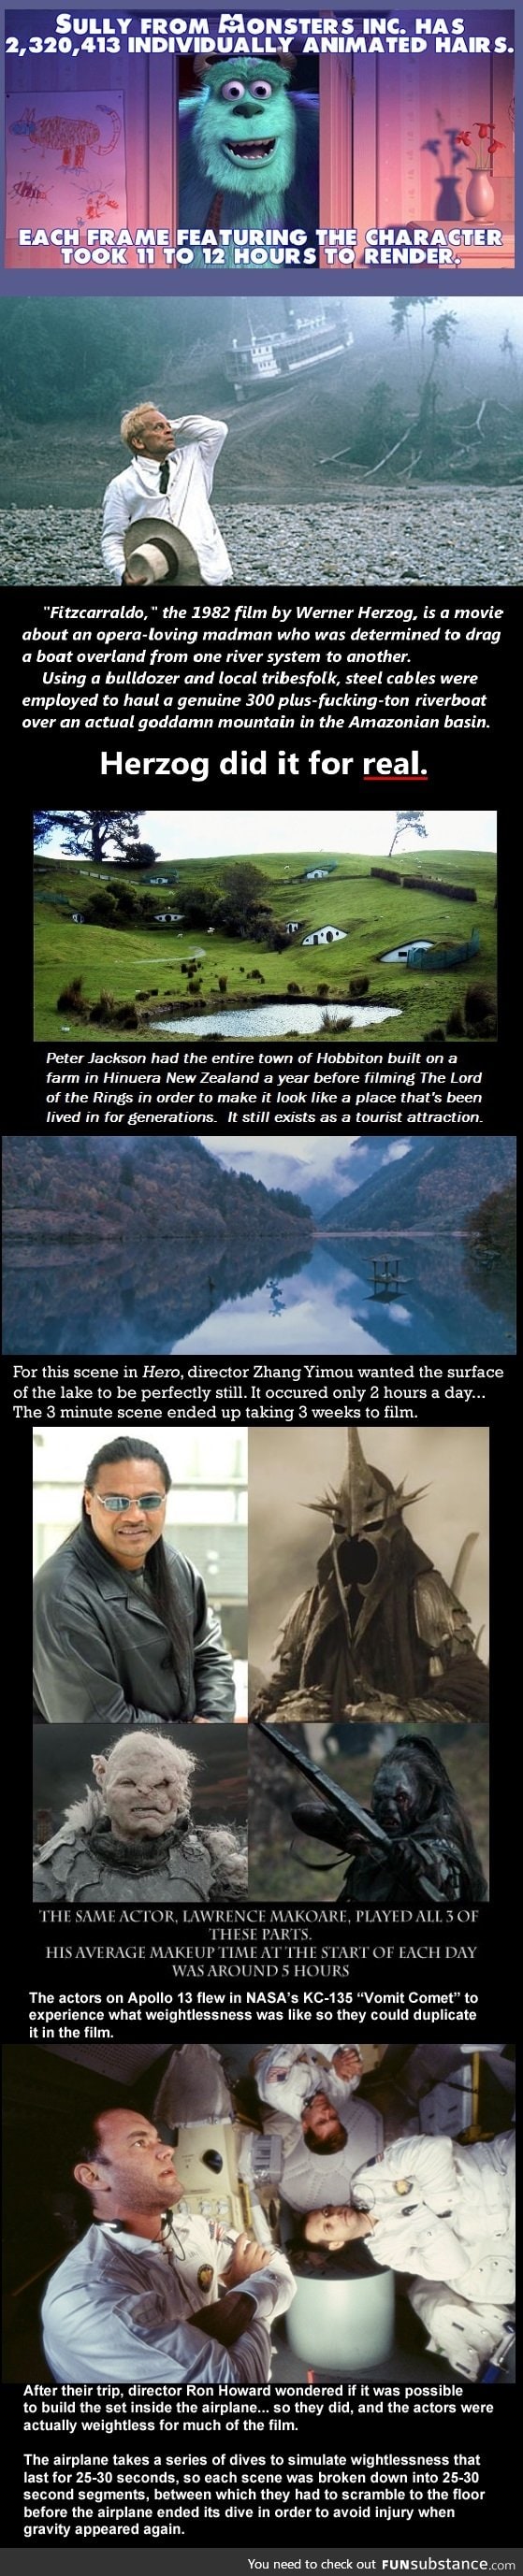 movie facts